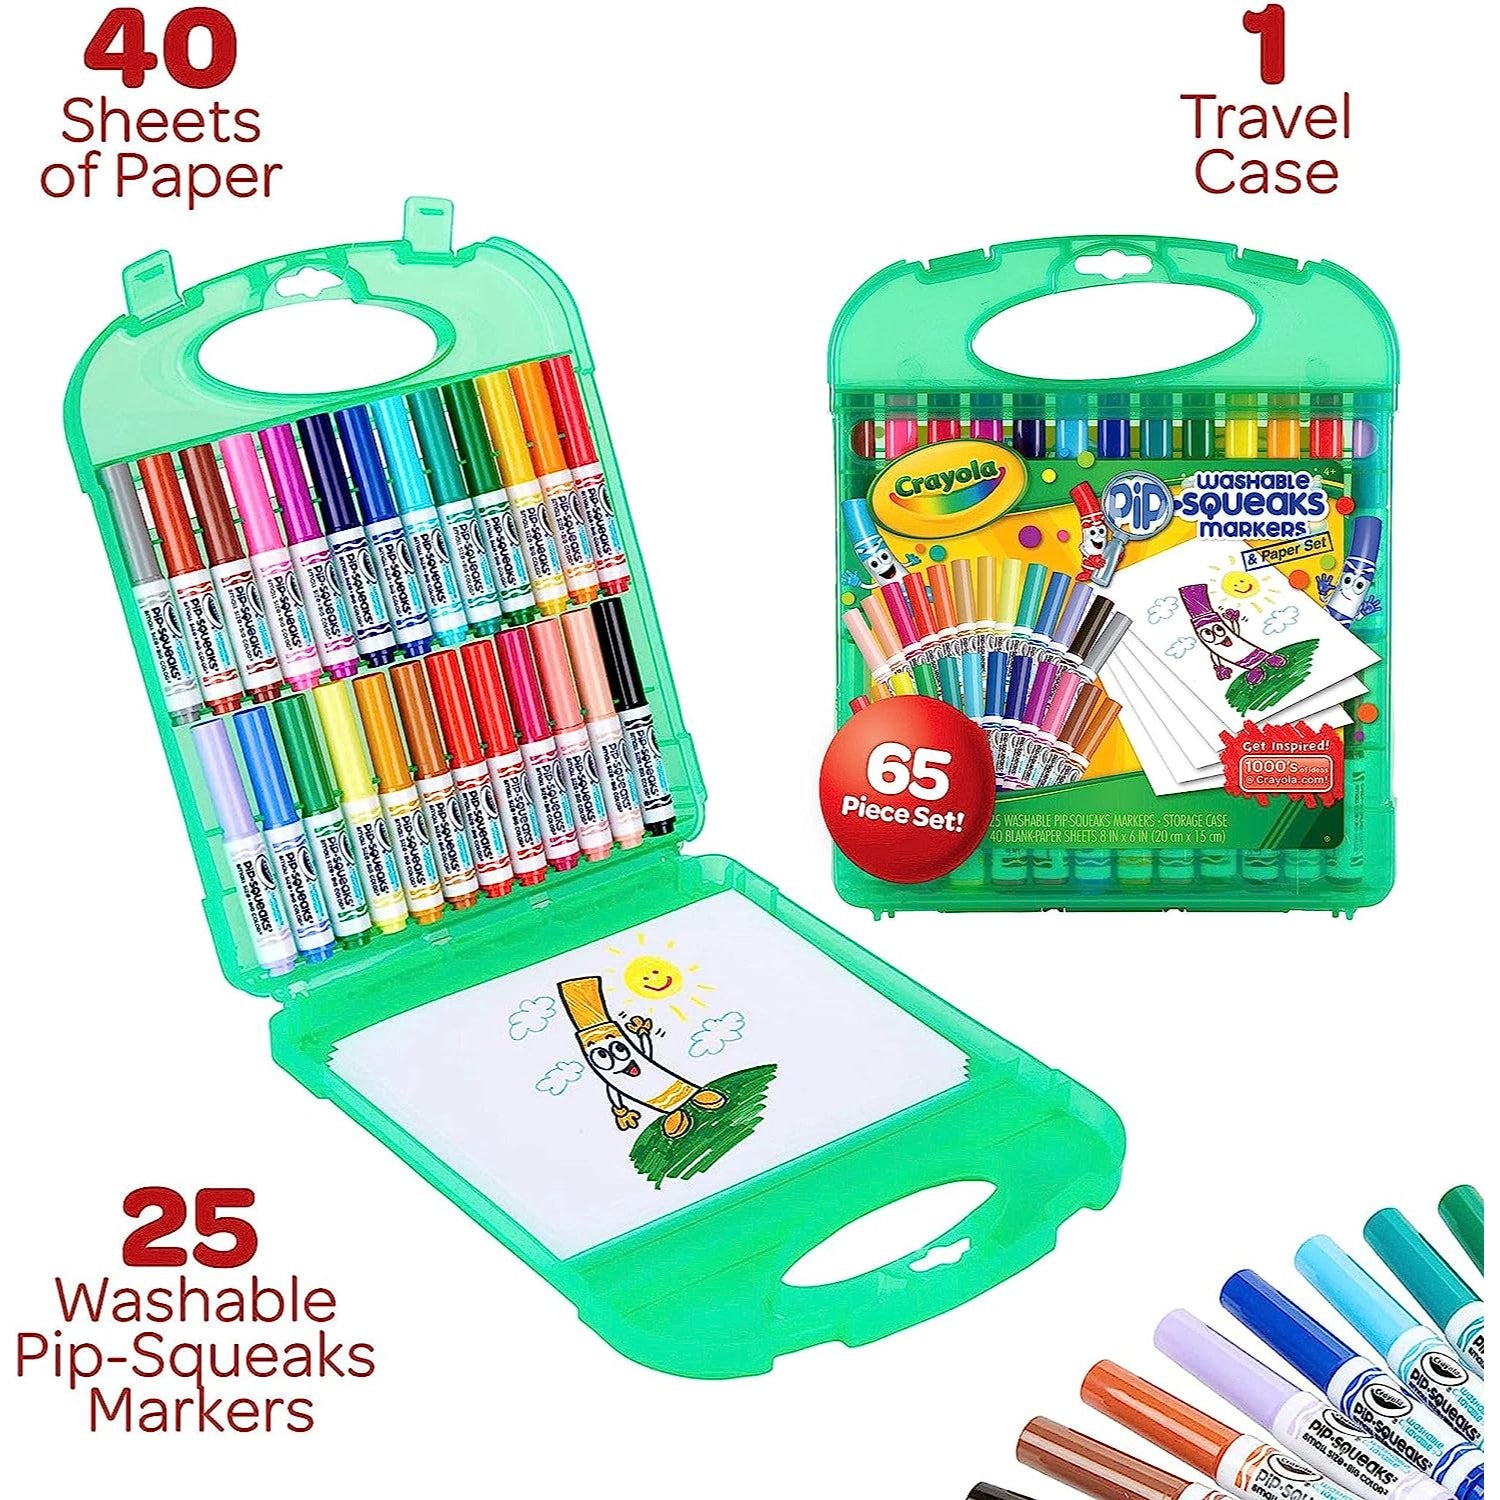 Art Kit, VigorFun 121 Piece Drawing Painting Art Supplies for Kids Girls Boys Teens, Gifts Art Set Case Includes Oil Pastels, Crayons, Colored Pencils